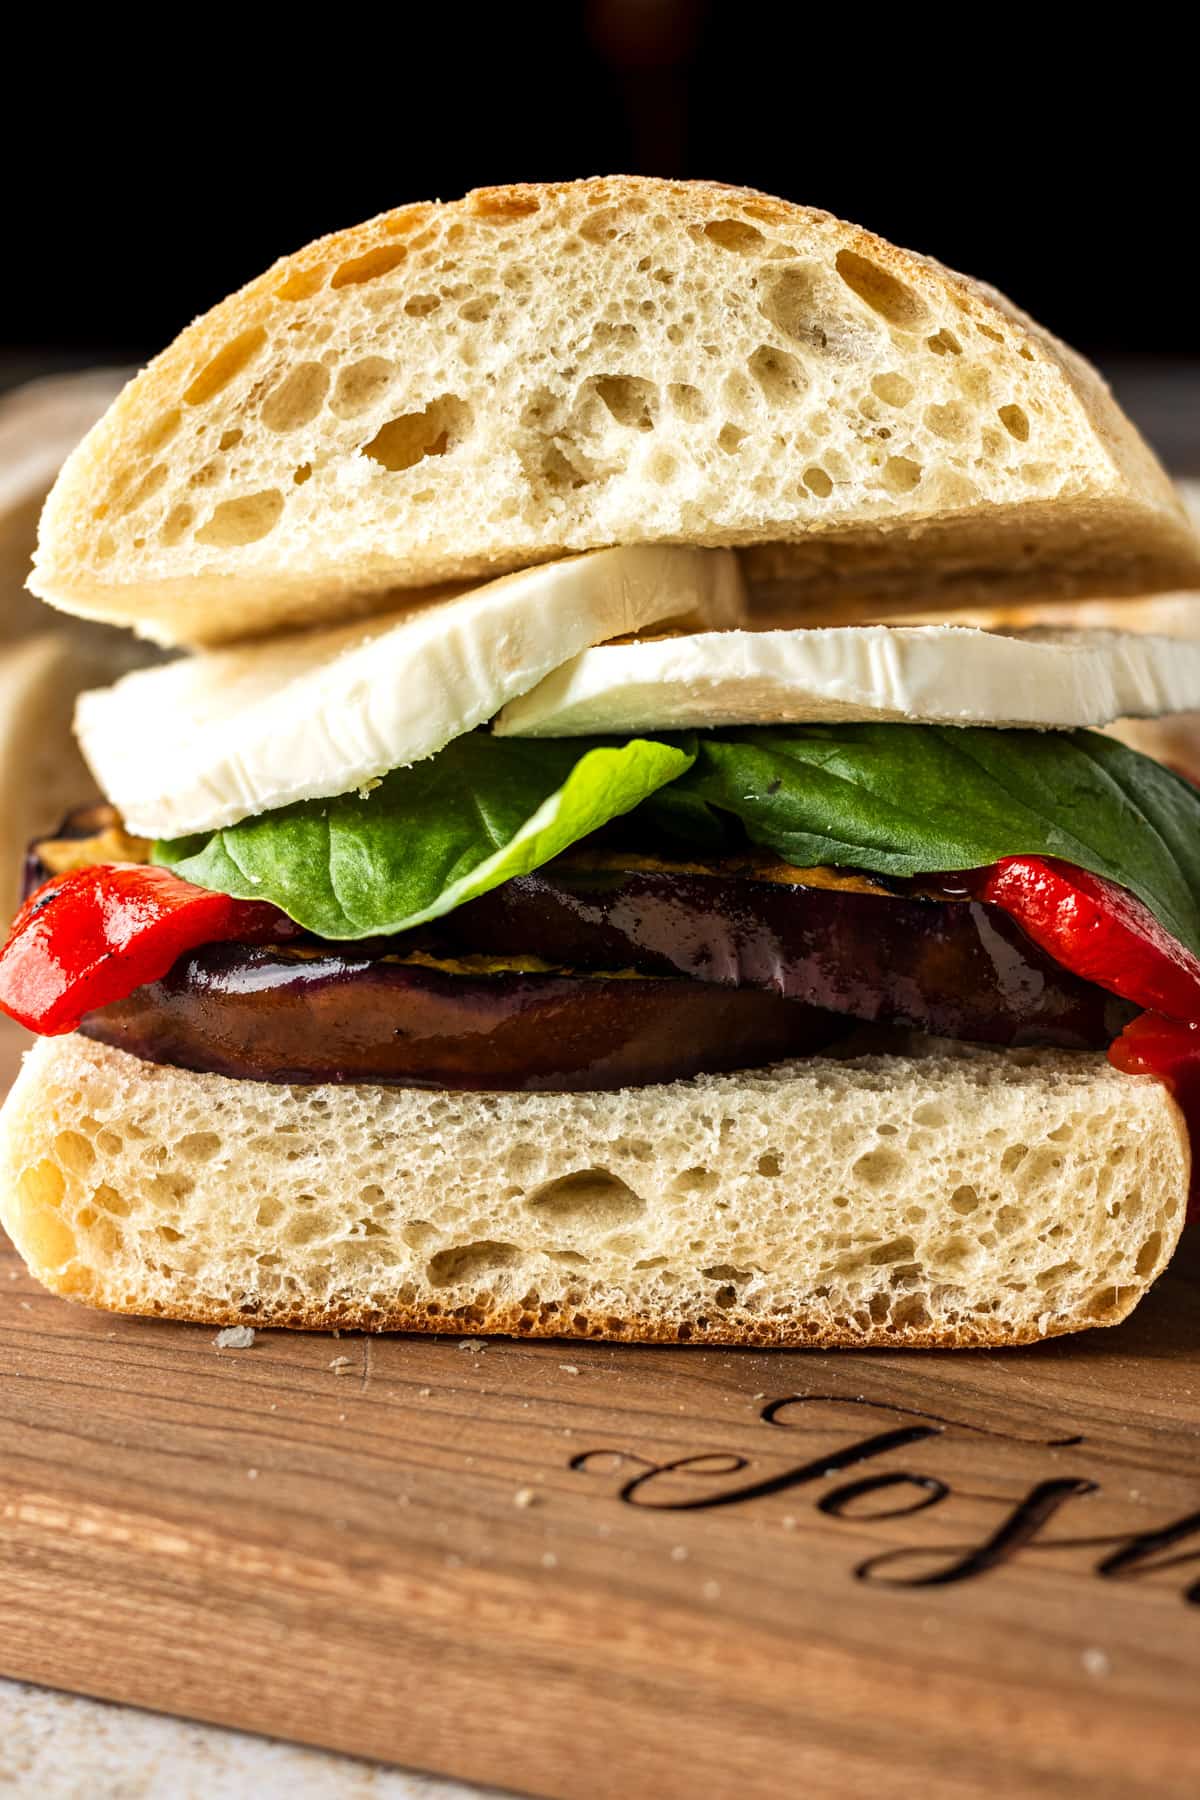 Grilled eggplant sandwich including red pepper, basil and cheese on a wooden cutting board.